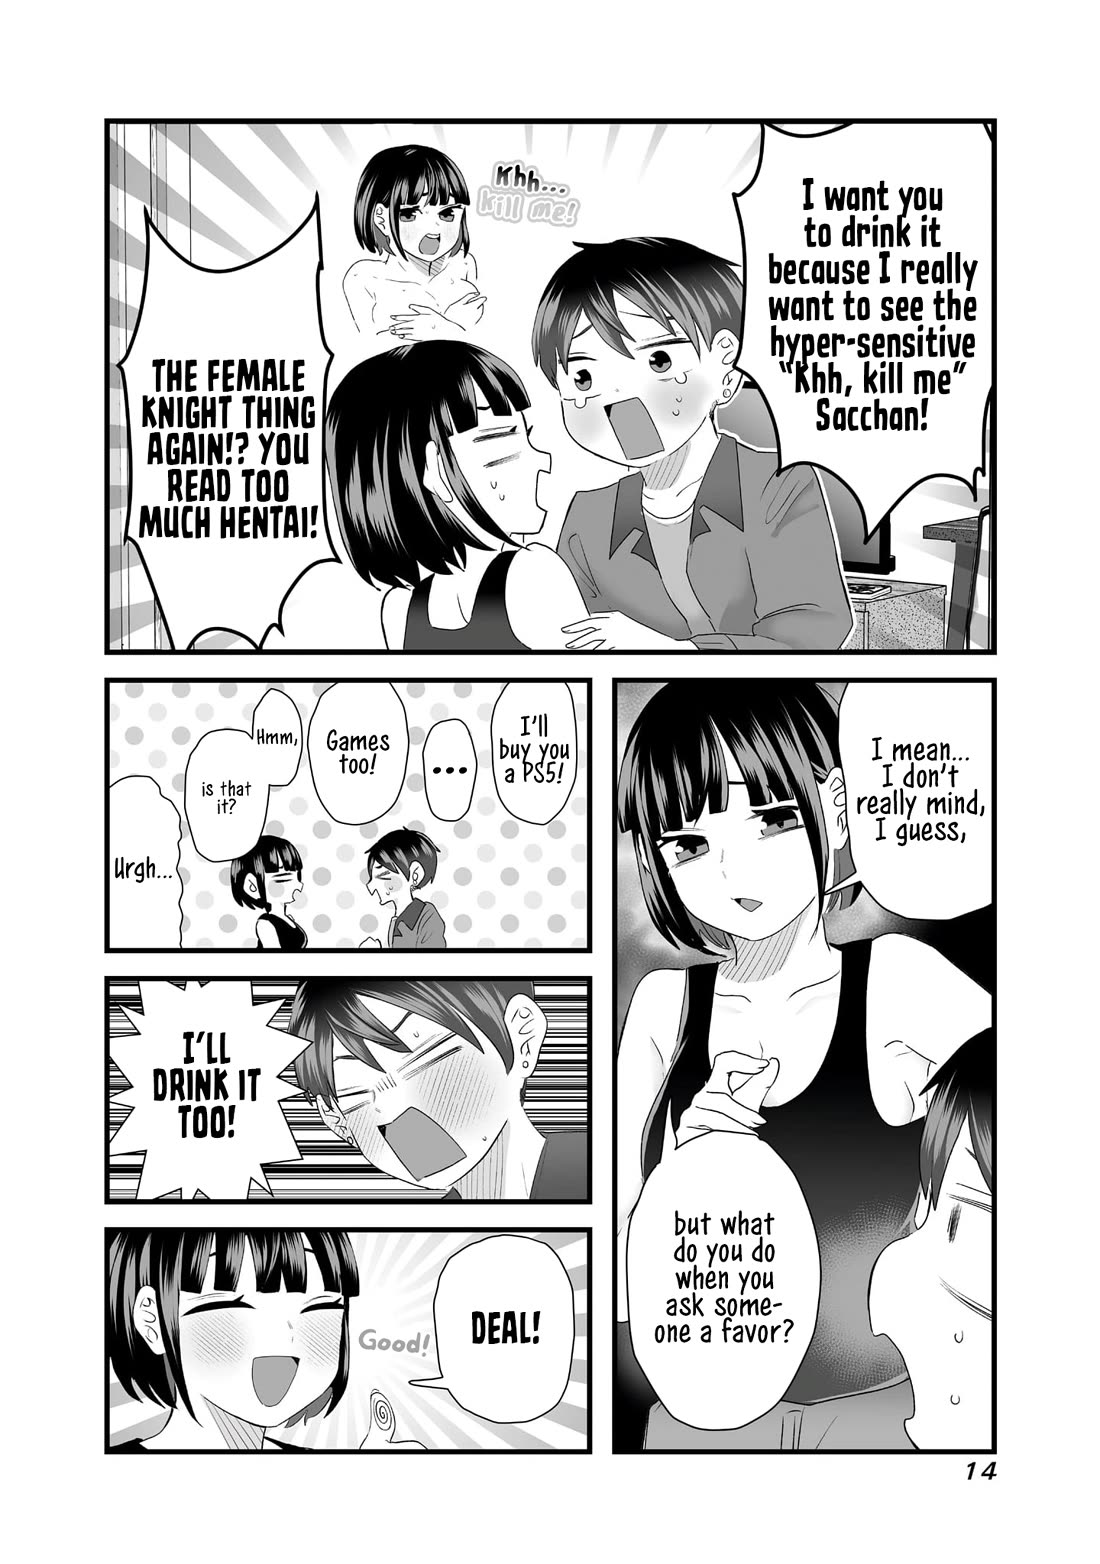 Sacchan and Ken-chan Are Going at it Again - chapter 2 - #2